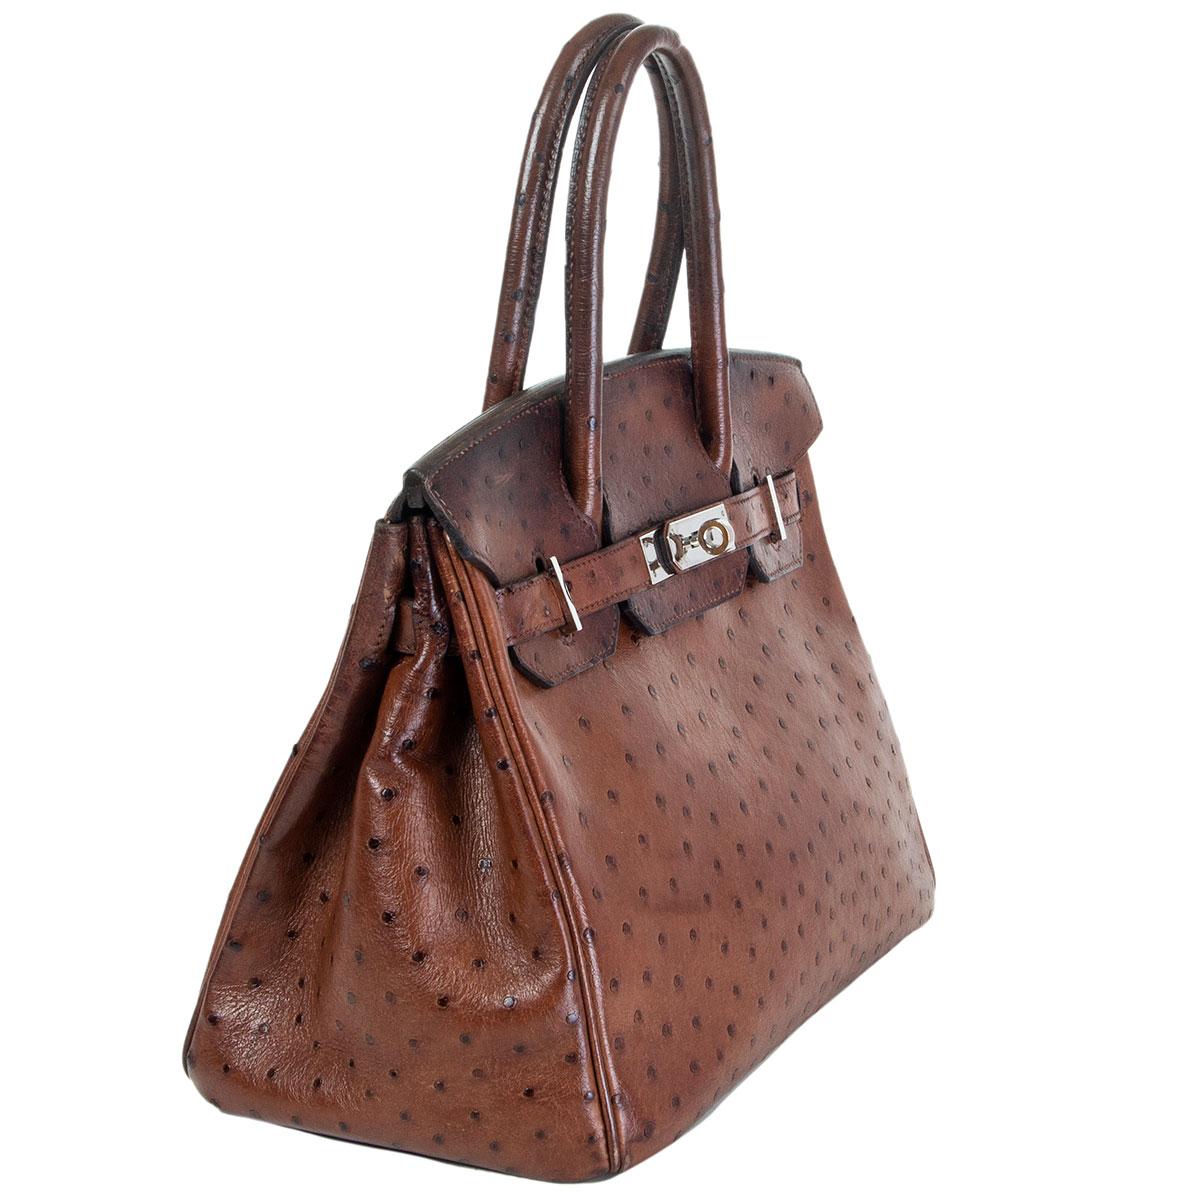 authentic Hermès Birkin 30 bag in Etrusque brown ostrich leather. Lined in brown chevre (goat skin) with an open pocket against the front and a zipper pocket against the back. Has been carried with patina allover, especially on the top part, back